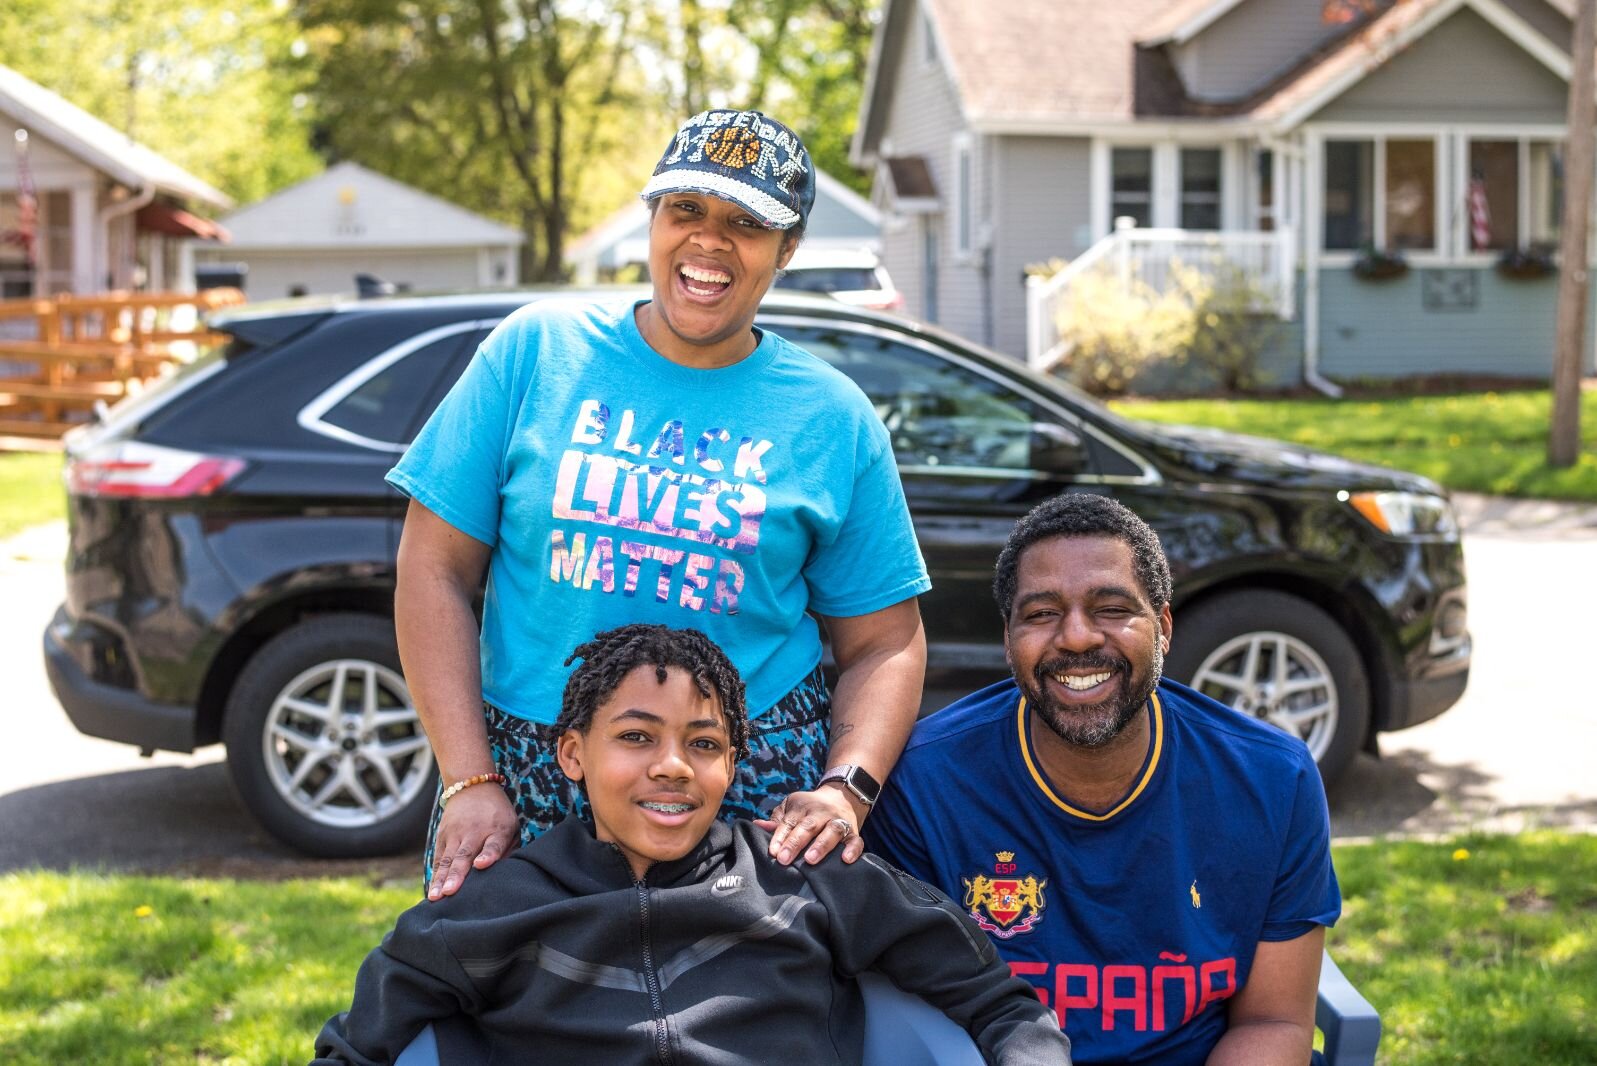 The Hemphill family, Ebony, Dontray, and DJ (seated), were inspired to advocate for juvenile justice reform when their son, then 9, was wrongly accused of starting a fight.